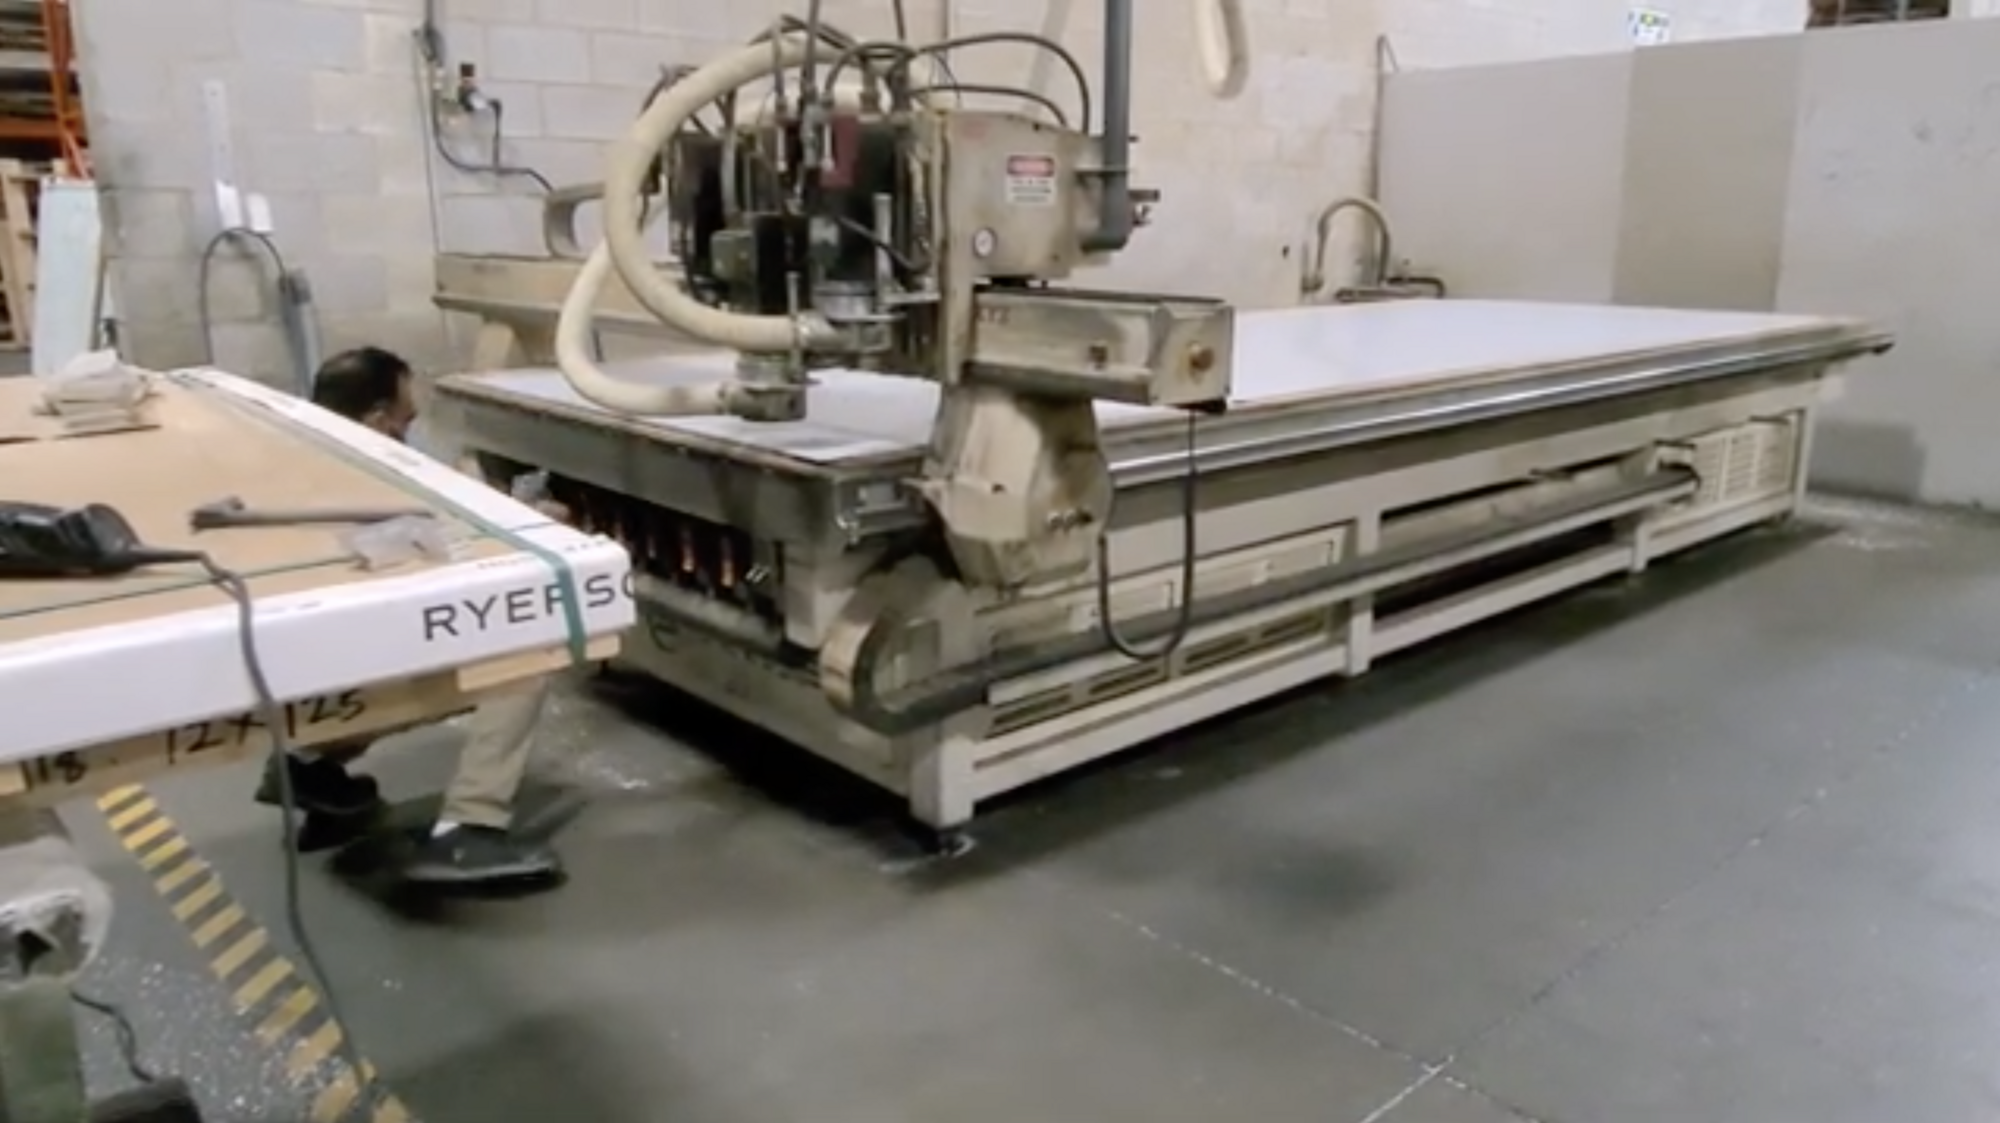 2010 AXYZ 6x16 Used 3 Axis CNC Routers | CNC Router Store